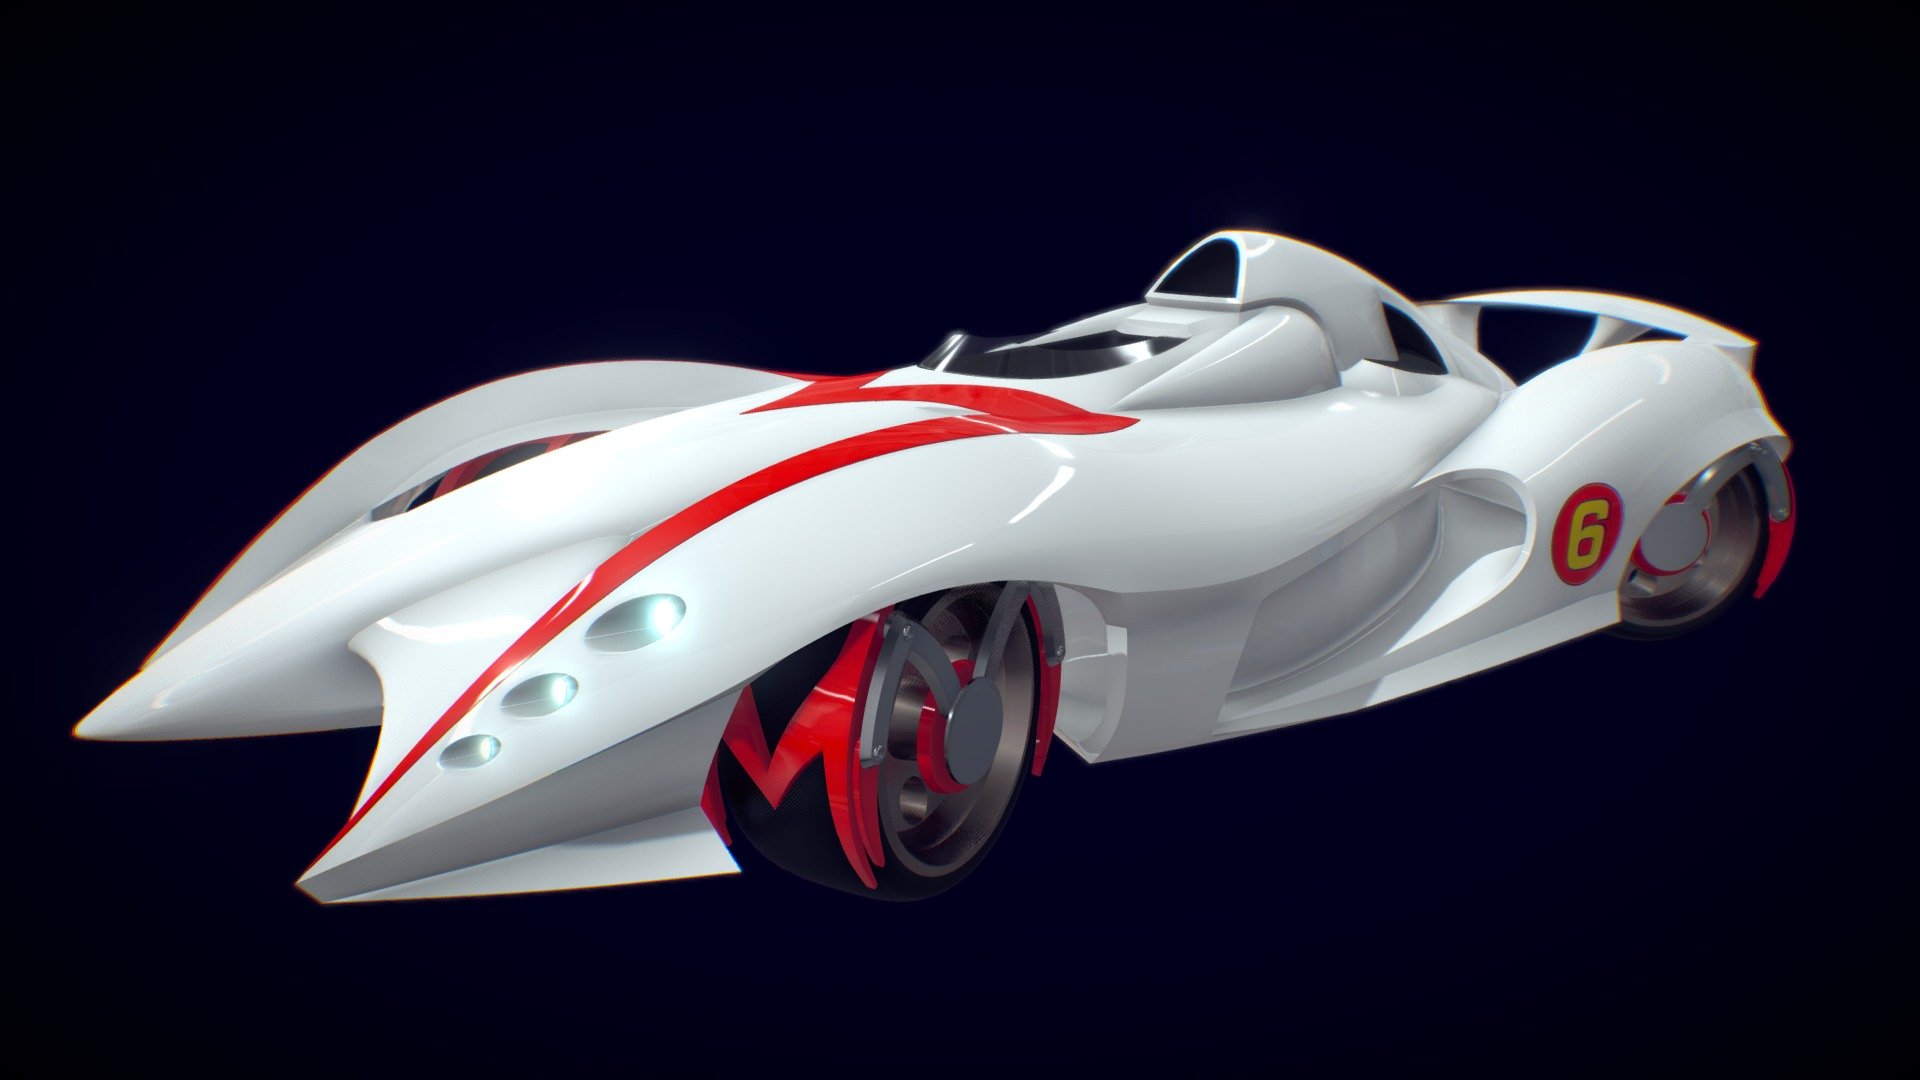 This is an attempt to recreate the main body of the Mach 6 seen in the 2008 film Speed Racer! This is probably my favourite fictional car of all time, so I highly recommend seeing it in action from the movie. While it's missing a few features like a cockpit, a more detailed engine/exhaust, or grills for the top and side intakes, I was focusing more on the main body and getting that as accurate as possible 3d model